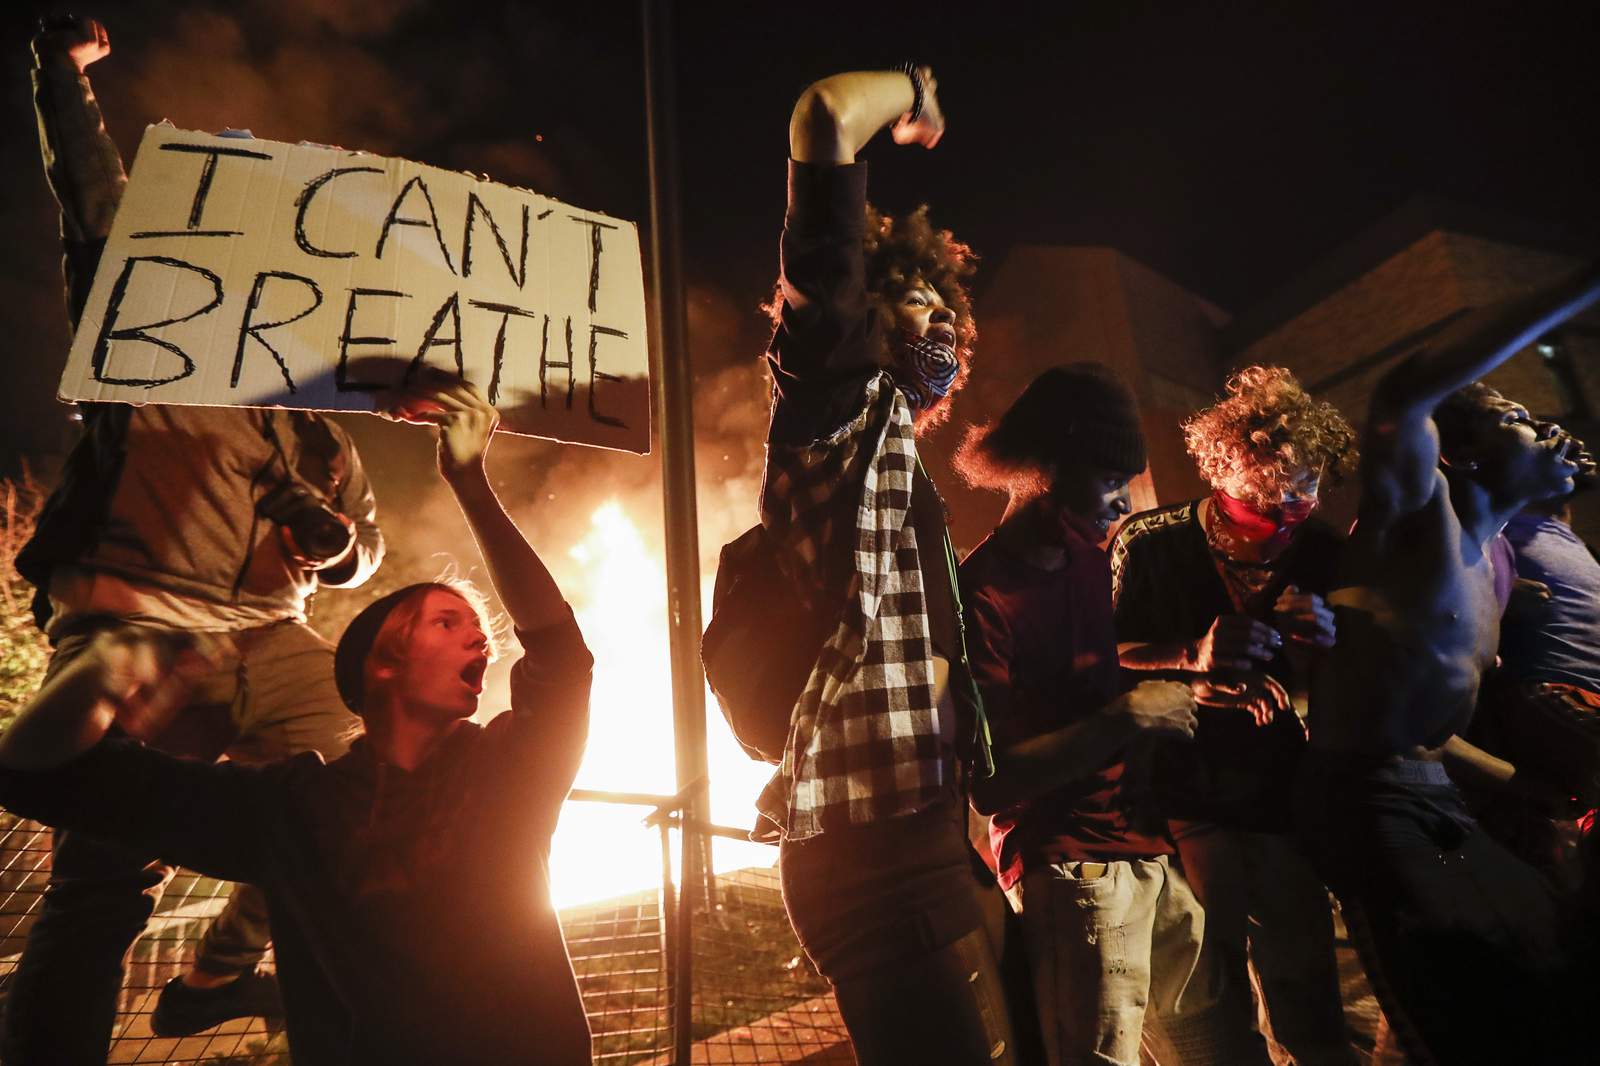 'I can't breathe' a rally cry anew for police protests in US